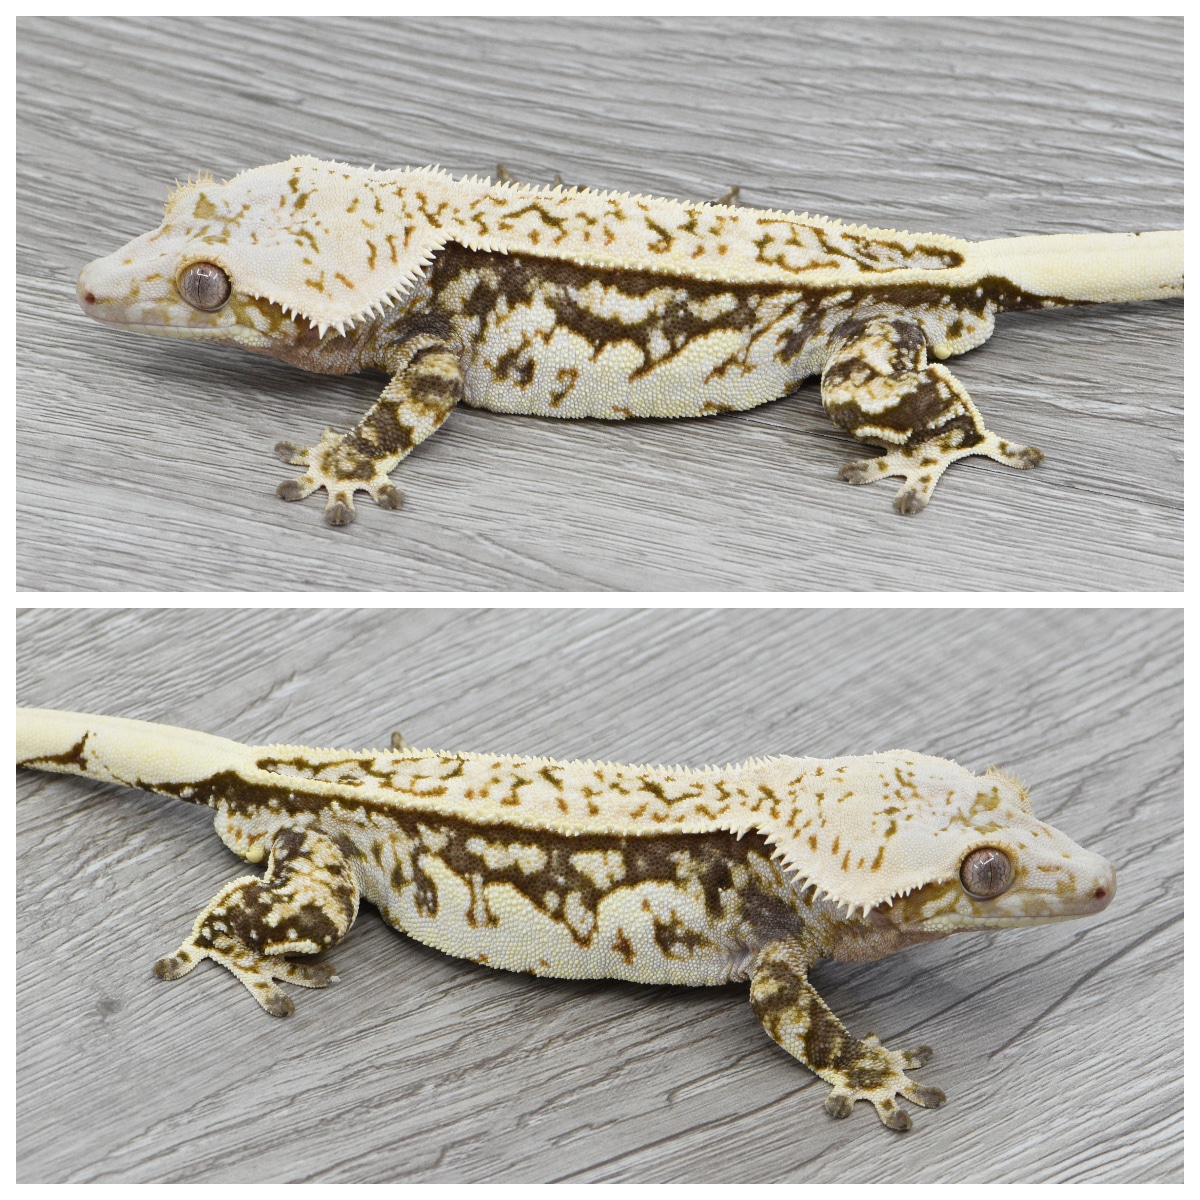 White Wall - High White Crested Gecko by Kryptiles